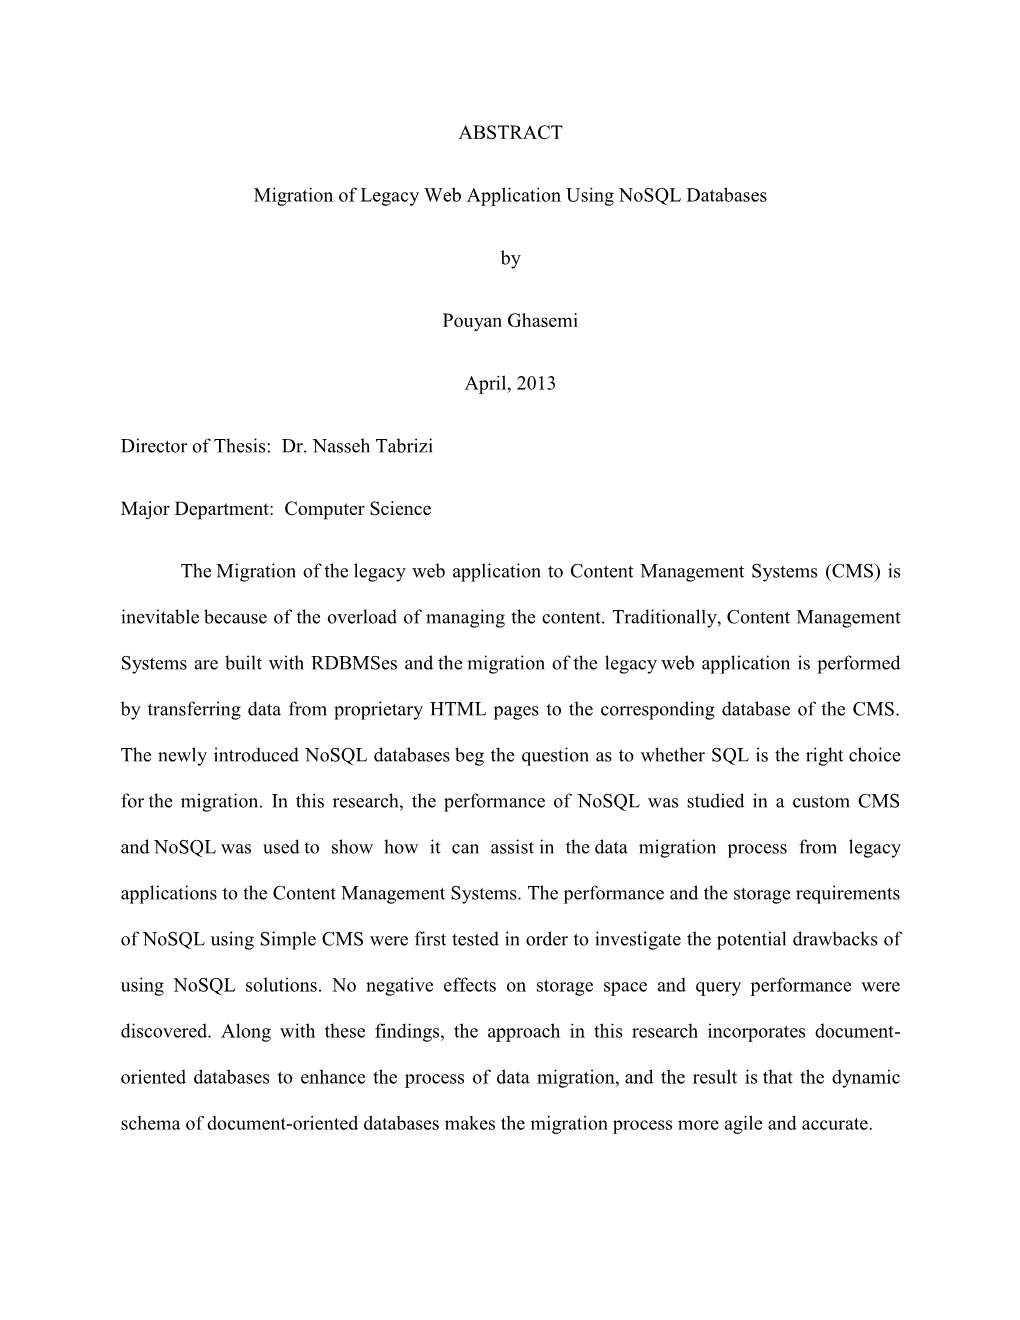 ABSTRACT Migration of Legacy Web Application Using Nosql Databases by Pouyan Ghasemi April, 2013 Director of Thesis: Dr. Nasseh